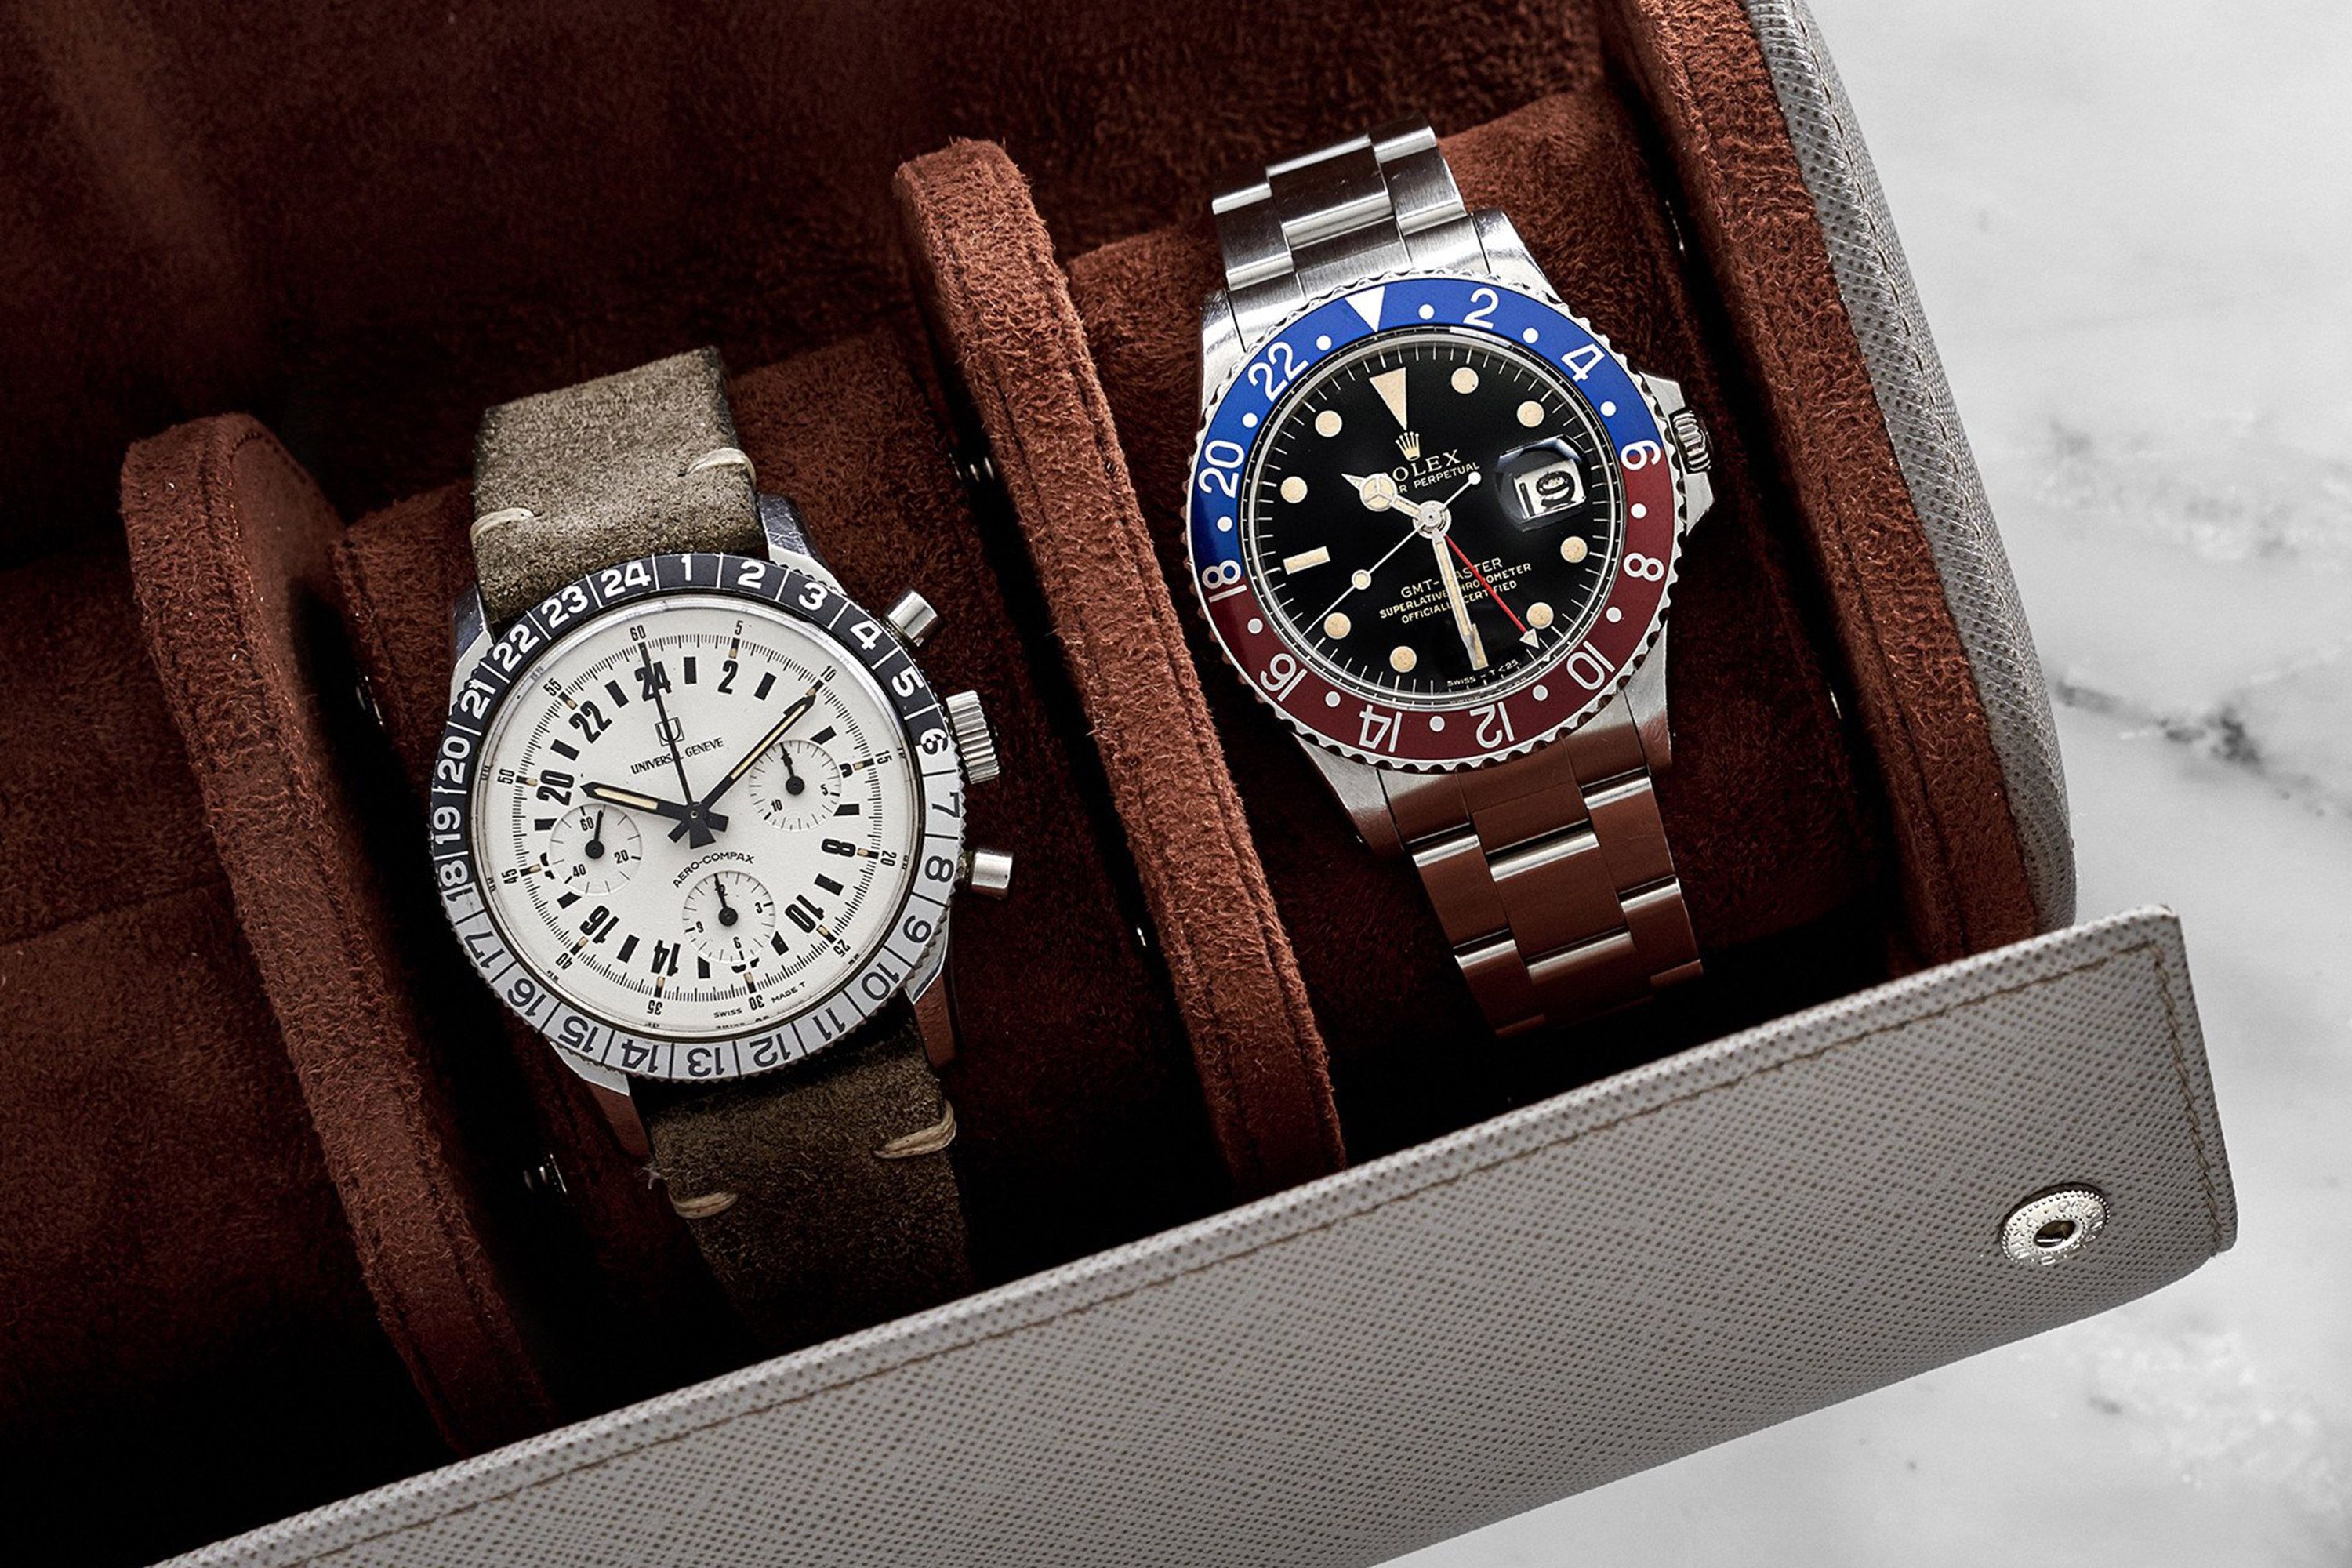 Top 7 Watch Travel Cases to Keep Your Watches Safe